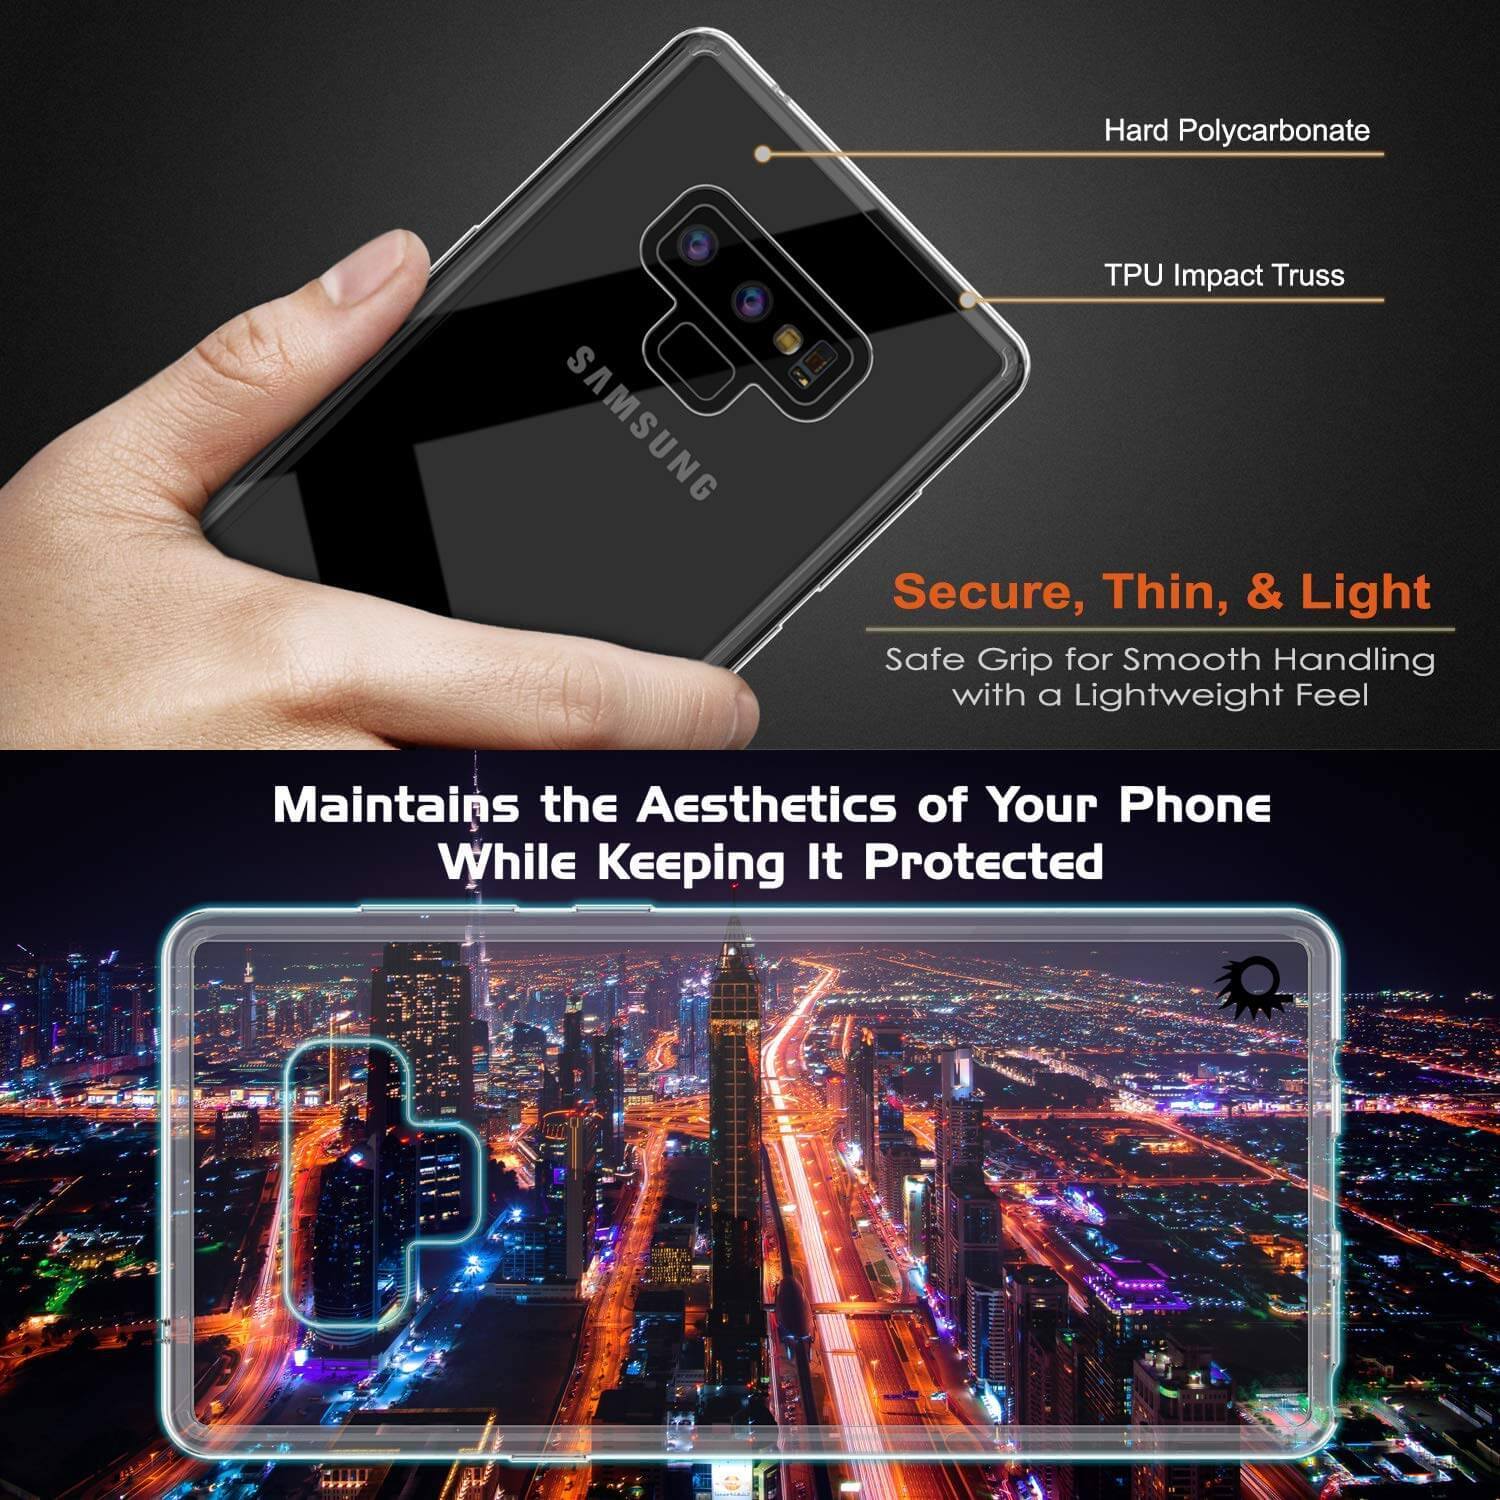 Galaxy Note 9 Case, PUNKcase [LUCID 2.0 Series] [Slim Fit] Armor Cover W/Integrated Anti-Shock System [Clear]